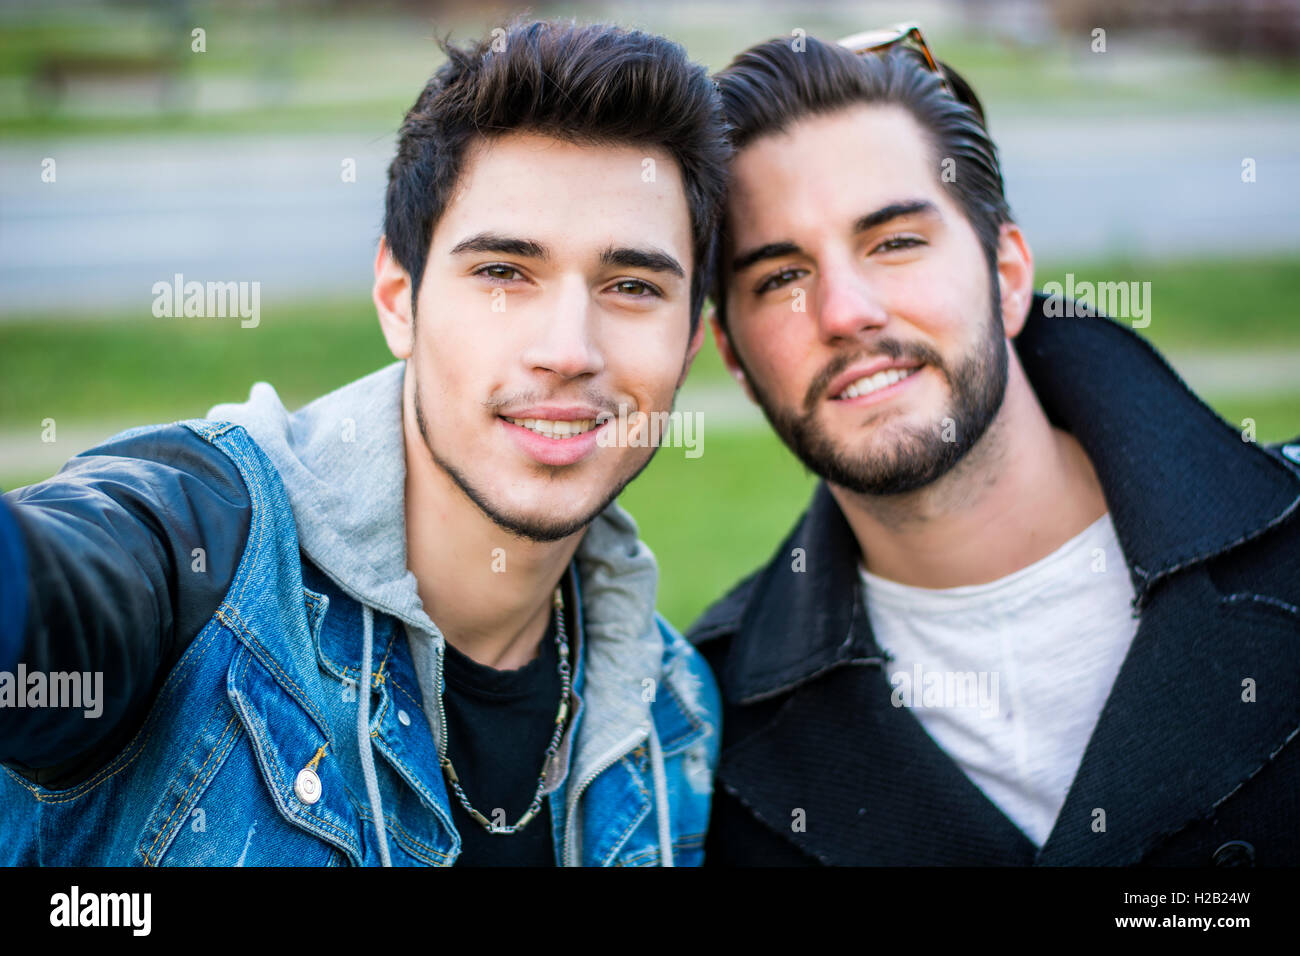 Two young men taking selfie while outdoors, point of view of the camera itself Stock Photo